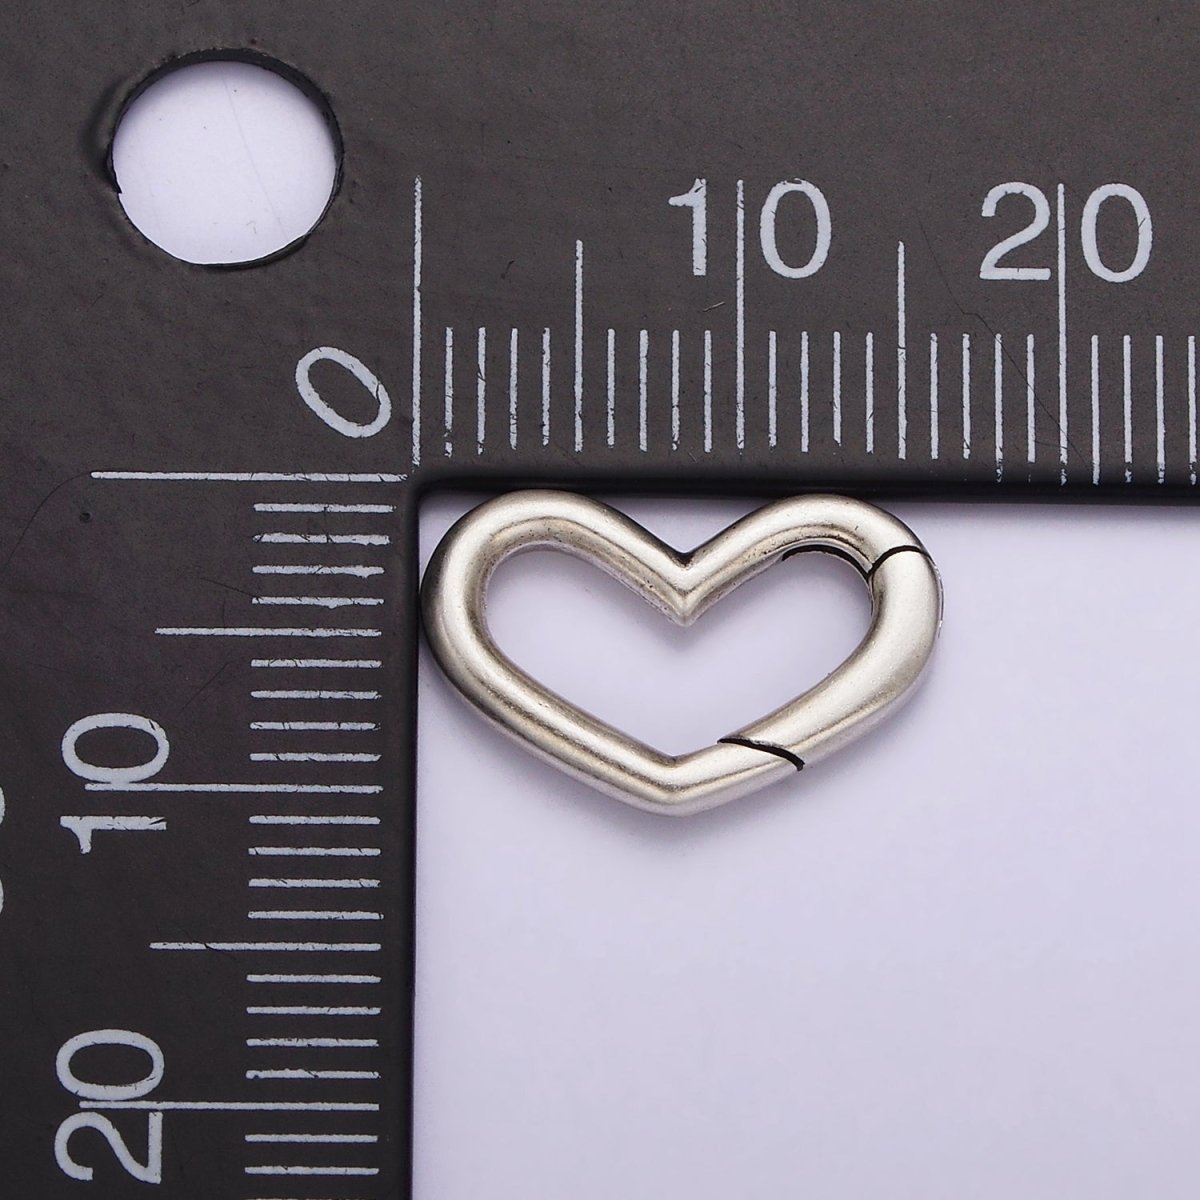 S925 Sterling Silver Hinged Heart Push Gate Ring Clasp Charm Pendants Interchangeable Connectors SL-307 - DLUXCA